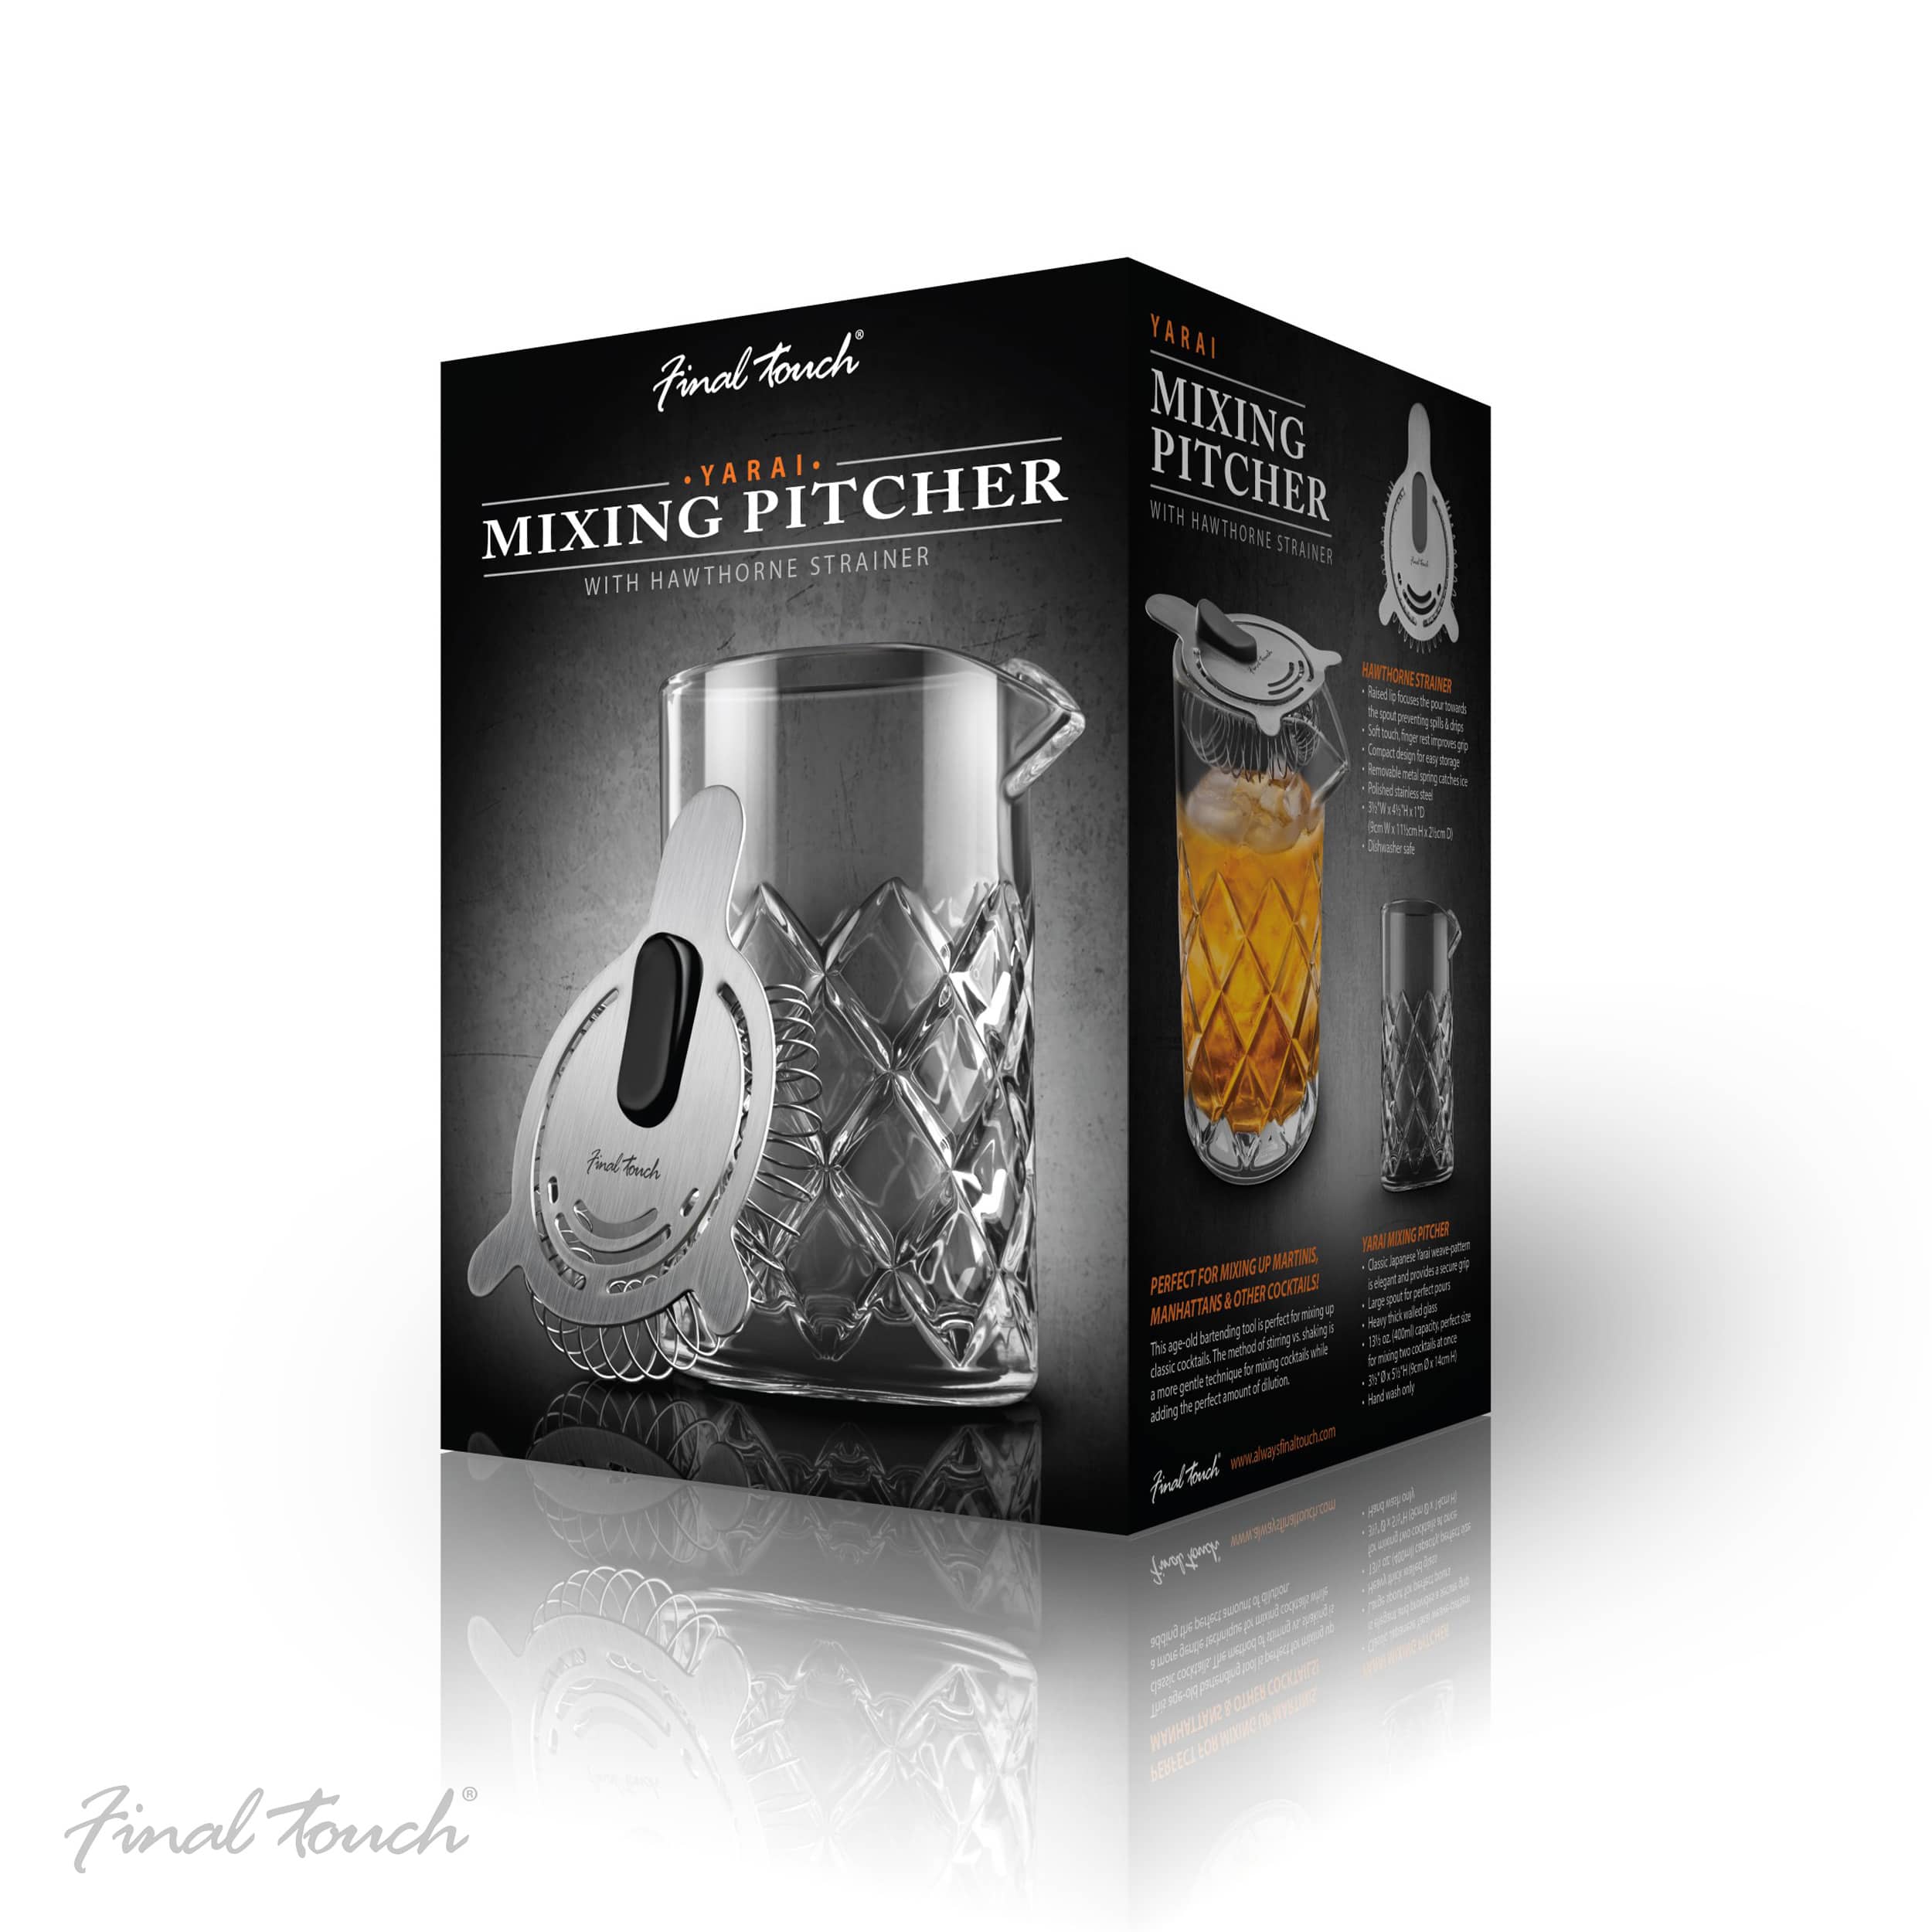 Mixing Pitcher With Hawthorne Strainer